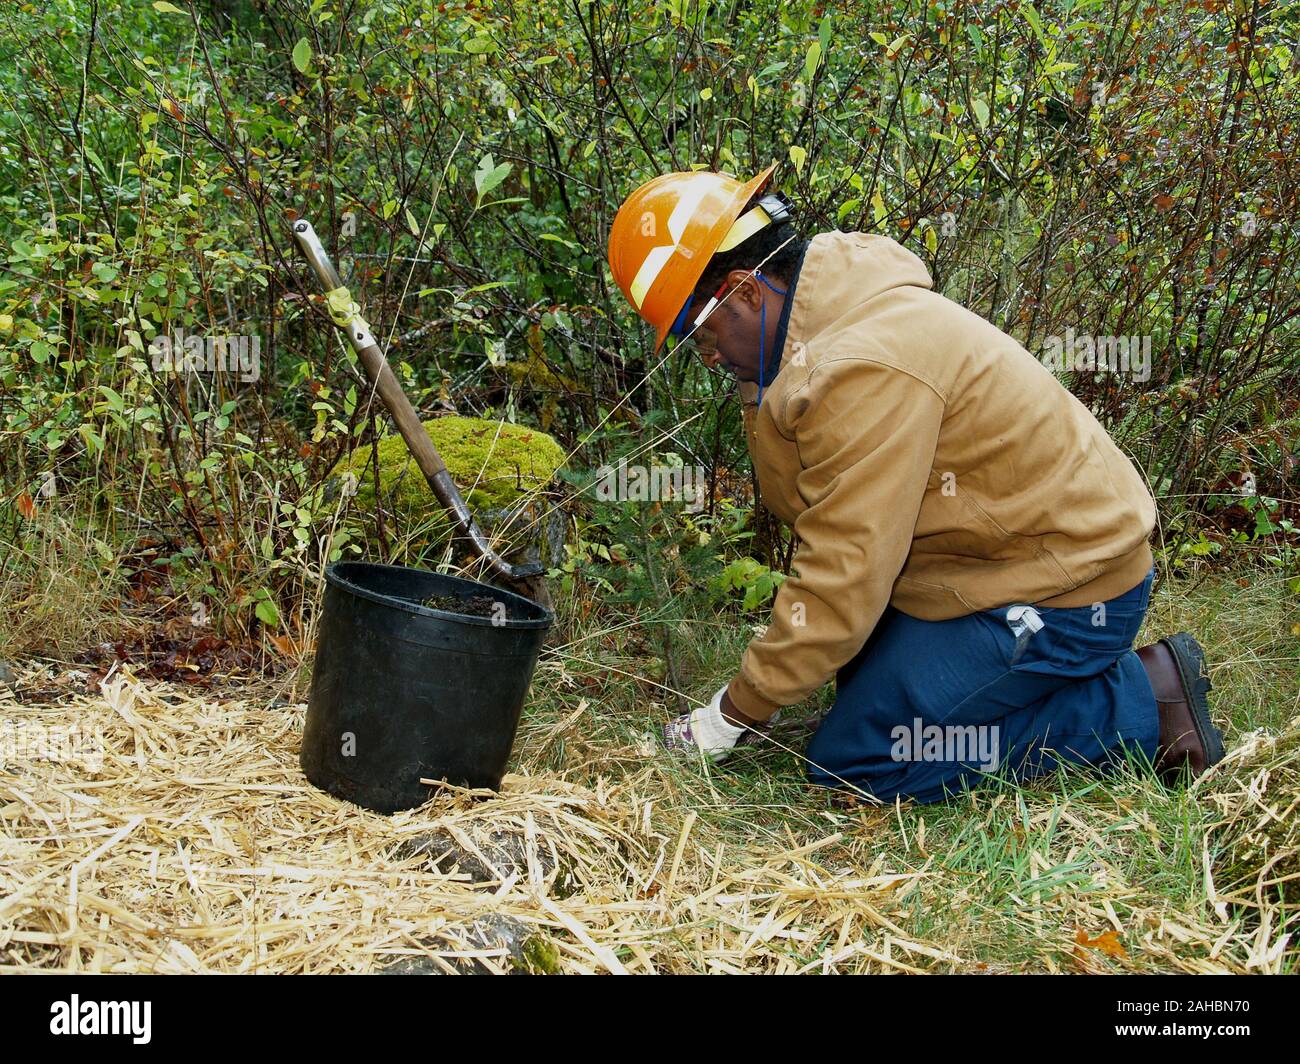 September 29, 2009. Estacada, OR. Timber Lake Job Corps Center student Biniyam Desta plants a seedling during a streamside restoration project on the Clackamas River. The project enhances the spawning areas of native salmon on the river. Stock Photo